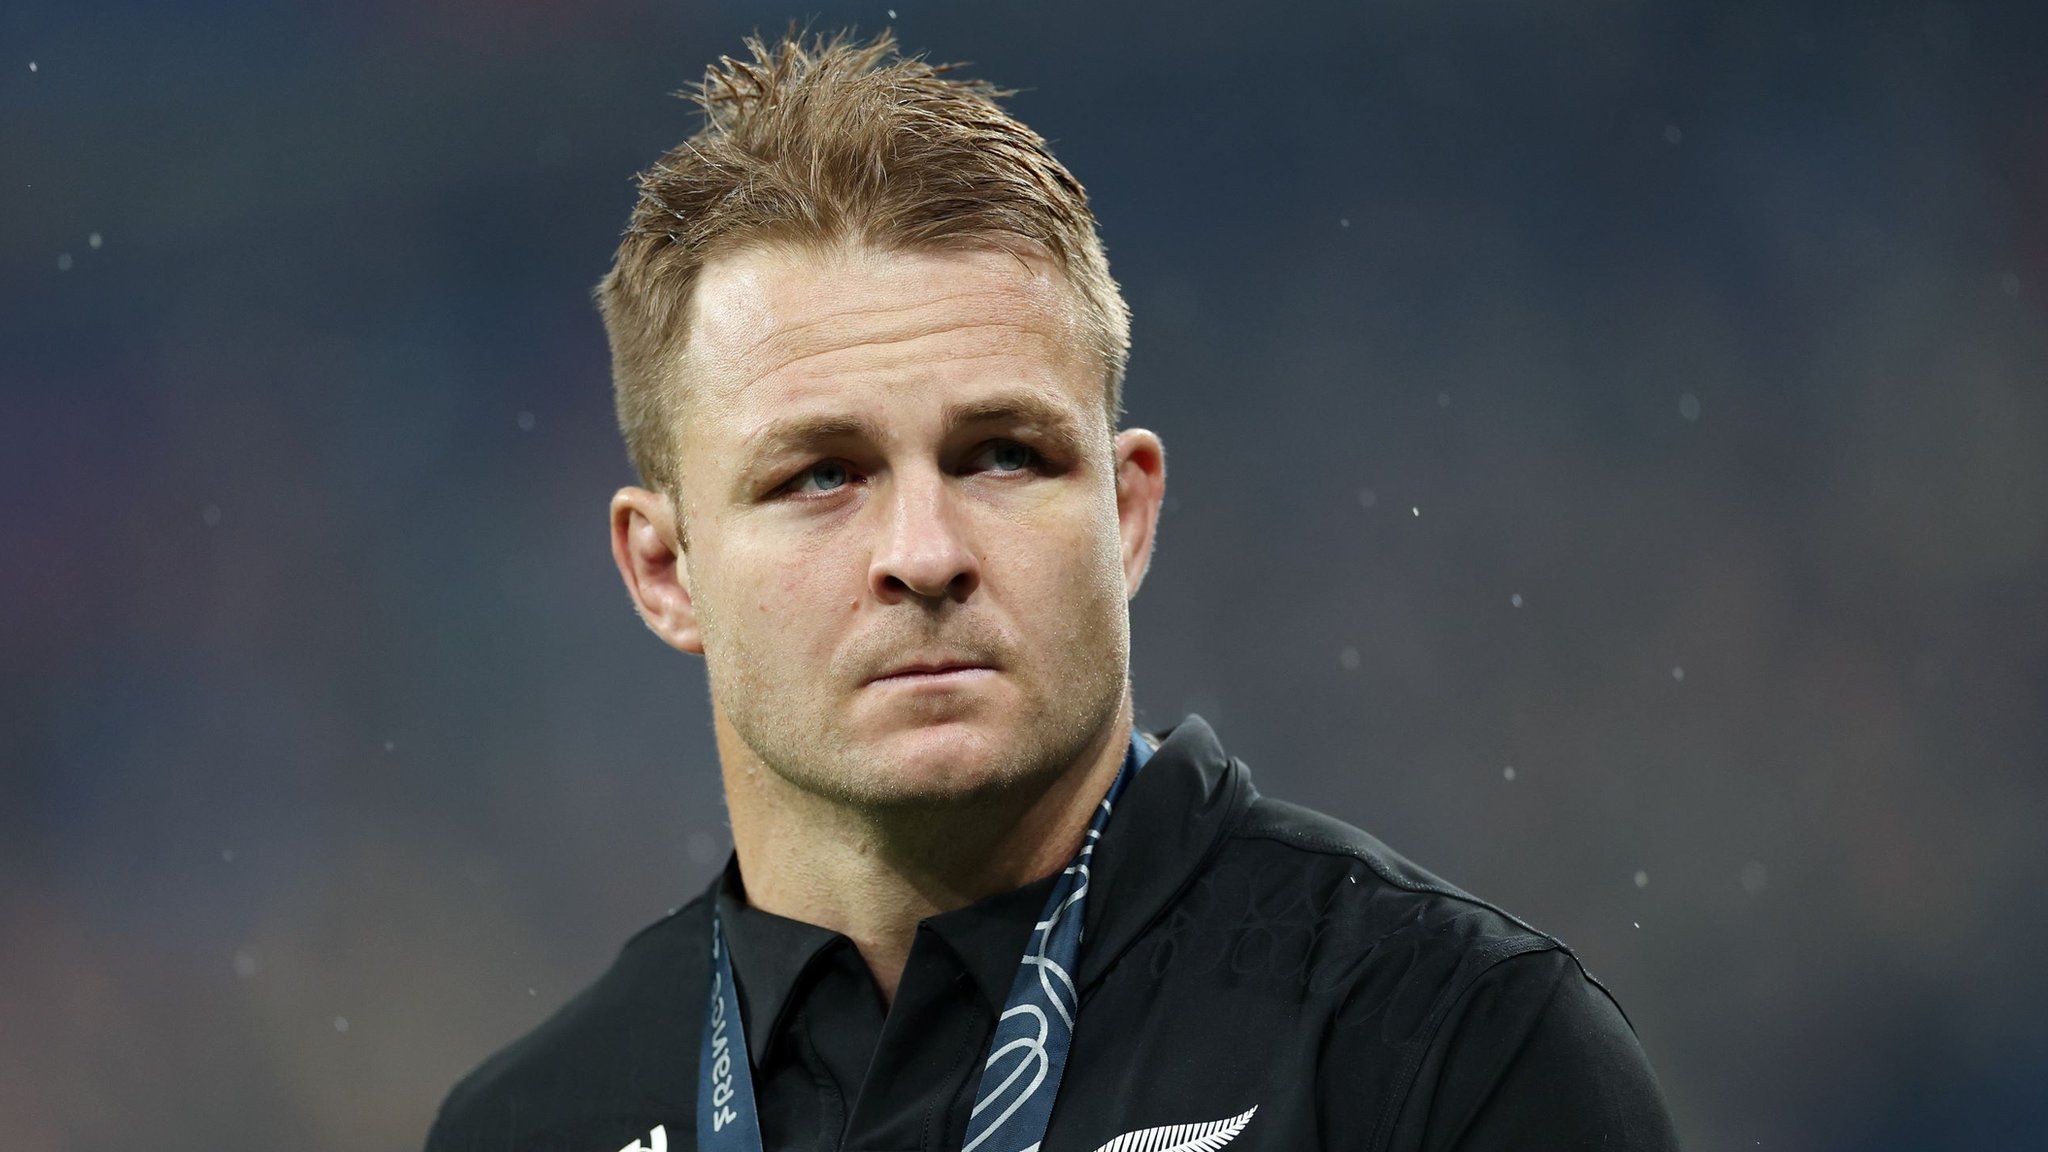 Sam Cane looks into the crowd while wearing his runner-up medal after New Zealand's World Cup final loss to South Africa